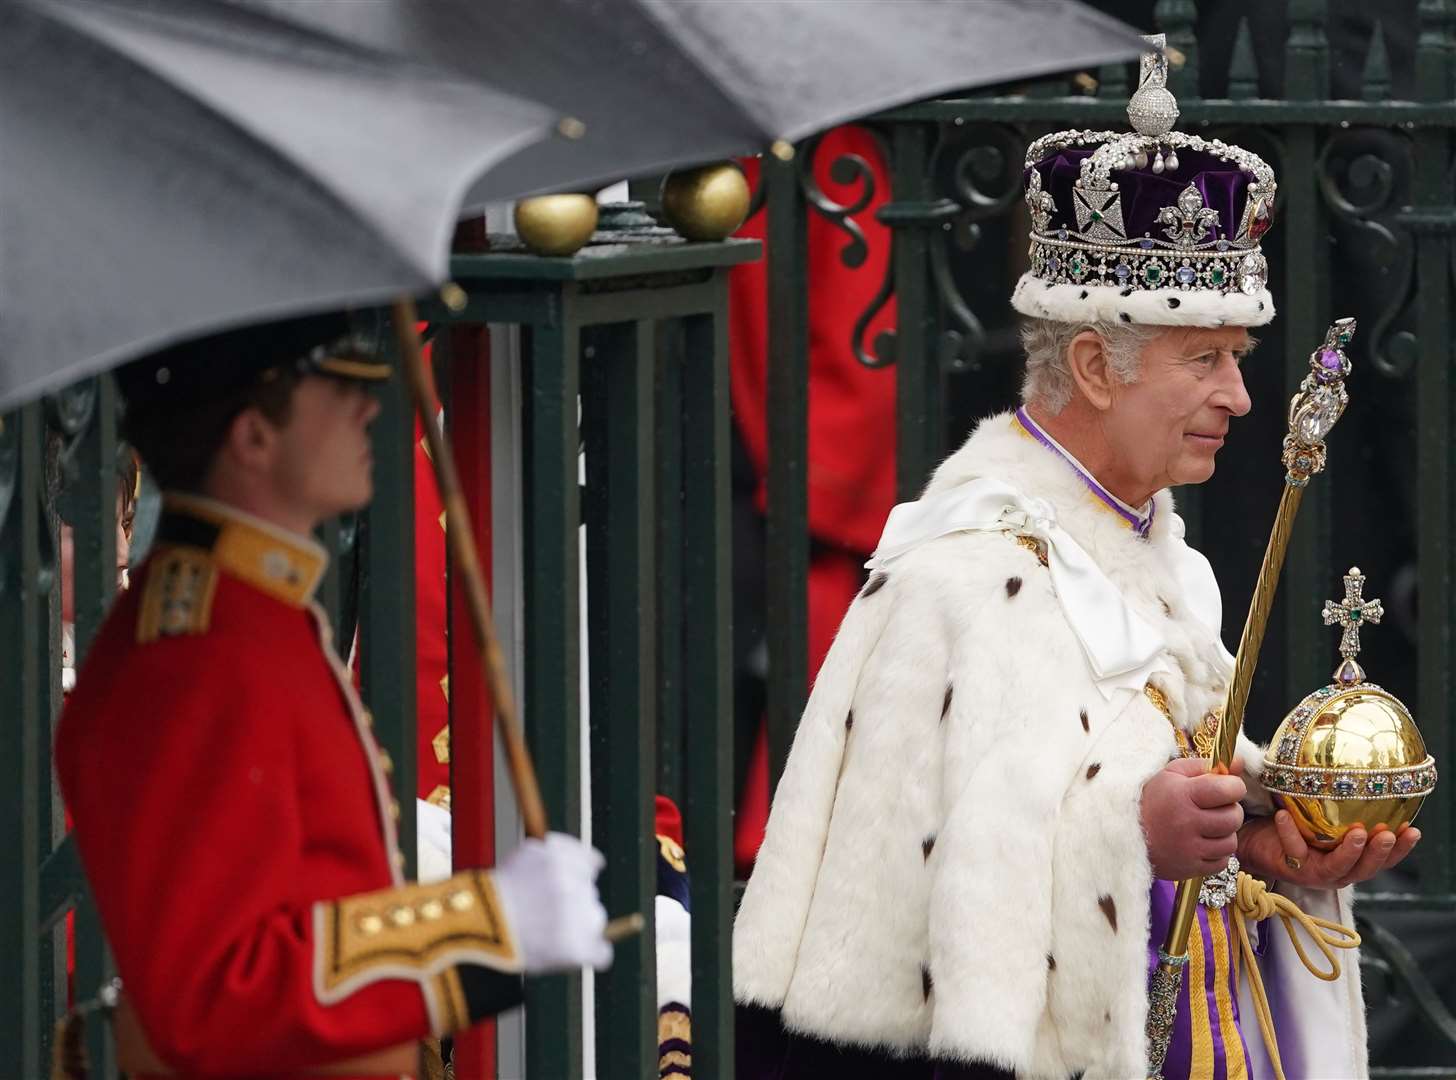 The King leaves Westminster Abbey after his coronation ceremony (Joe Giddens/PA)